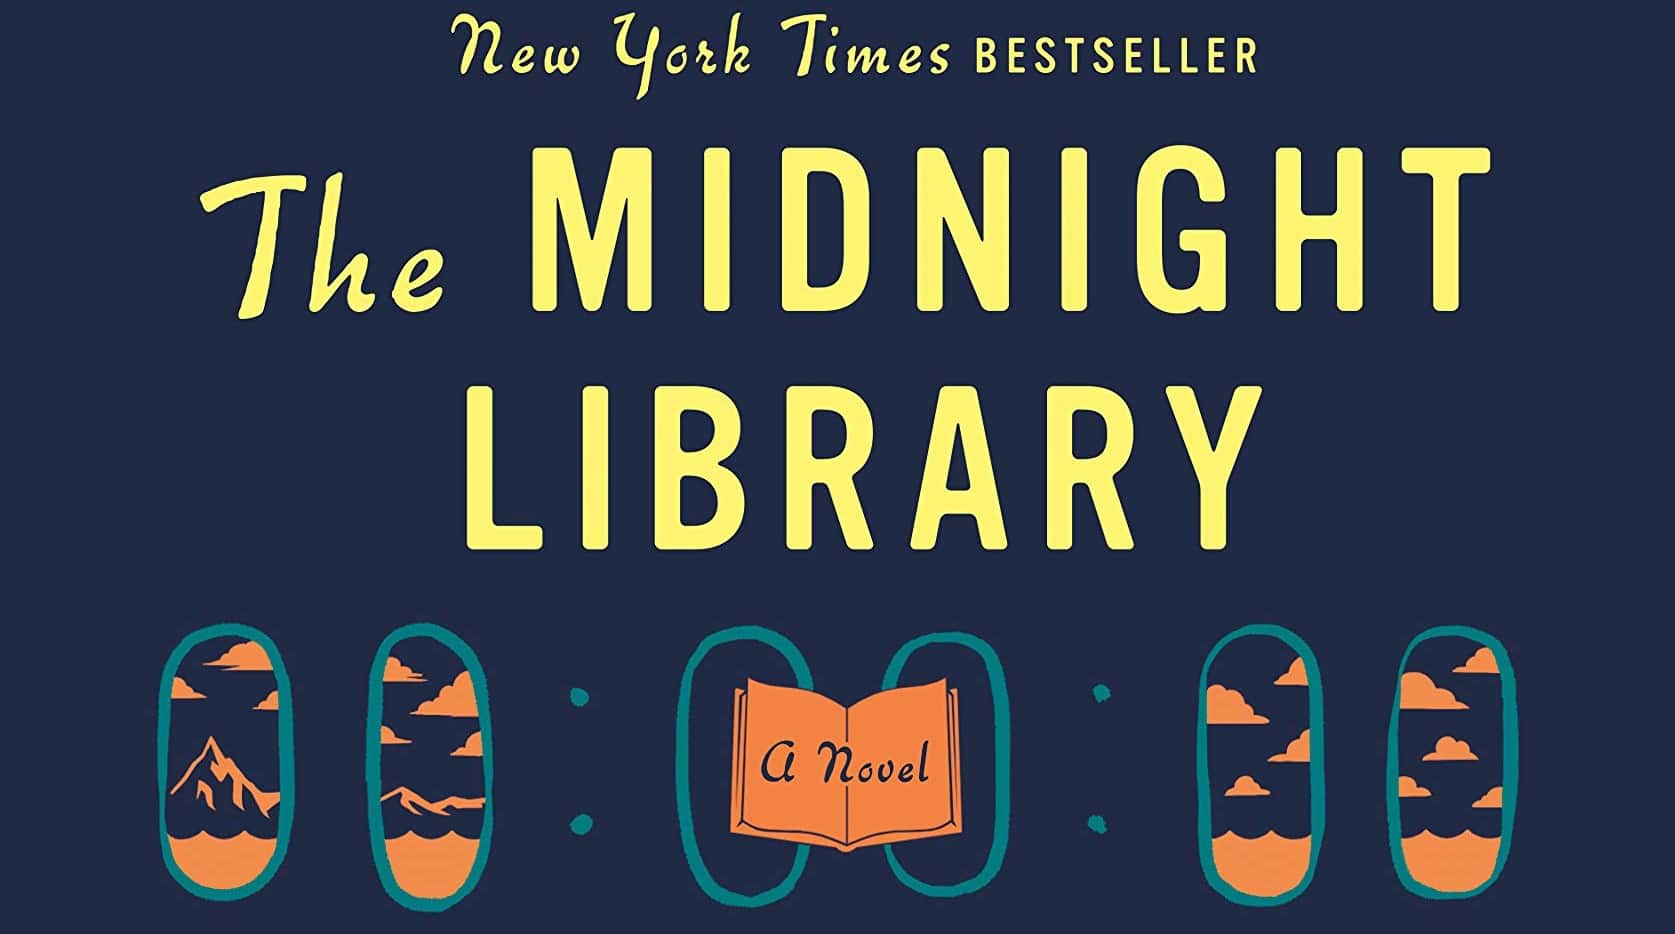 An image of The Midnight Library novel's cover.